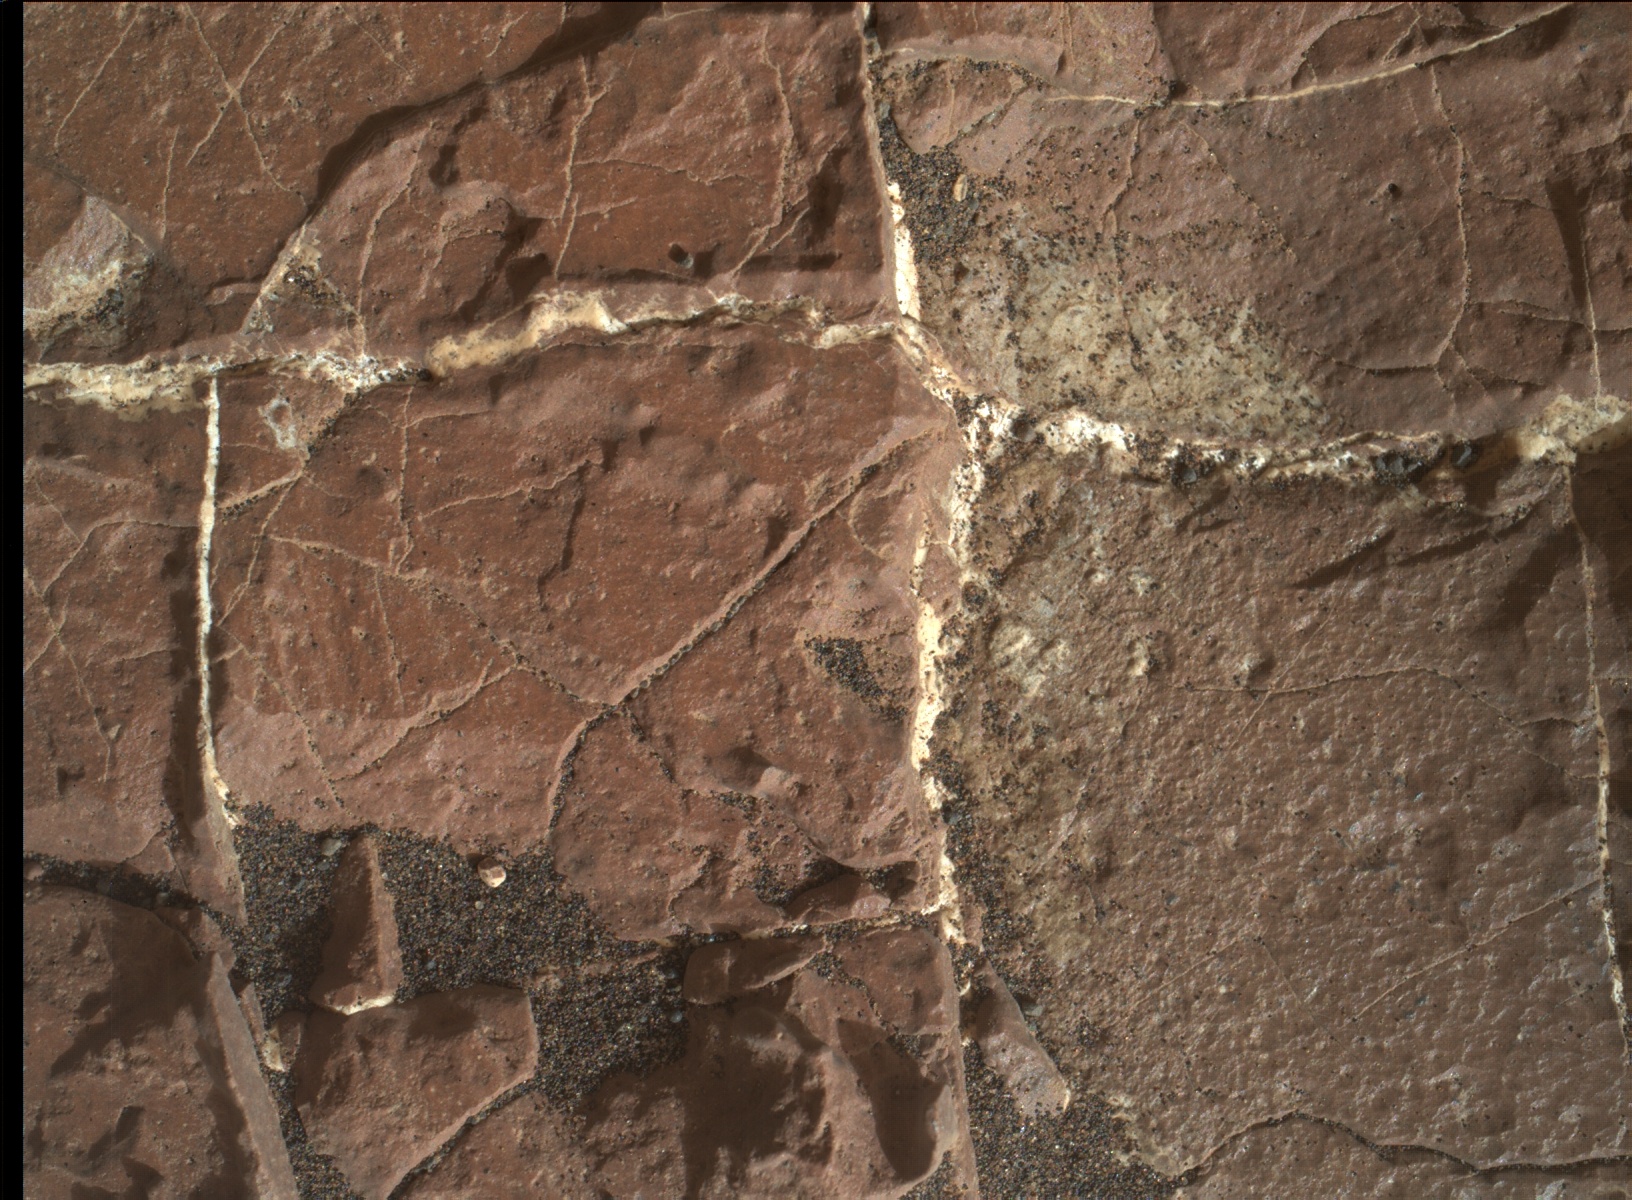 Nasa's Mars rover Curiosity acquired this image using its Mars Hand Lens Imager (MAHLI) on Sol 1569